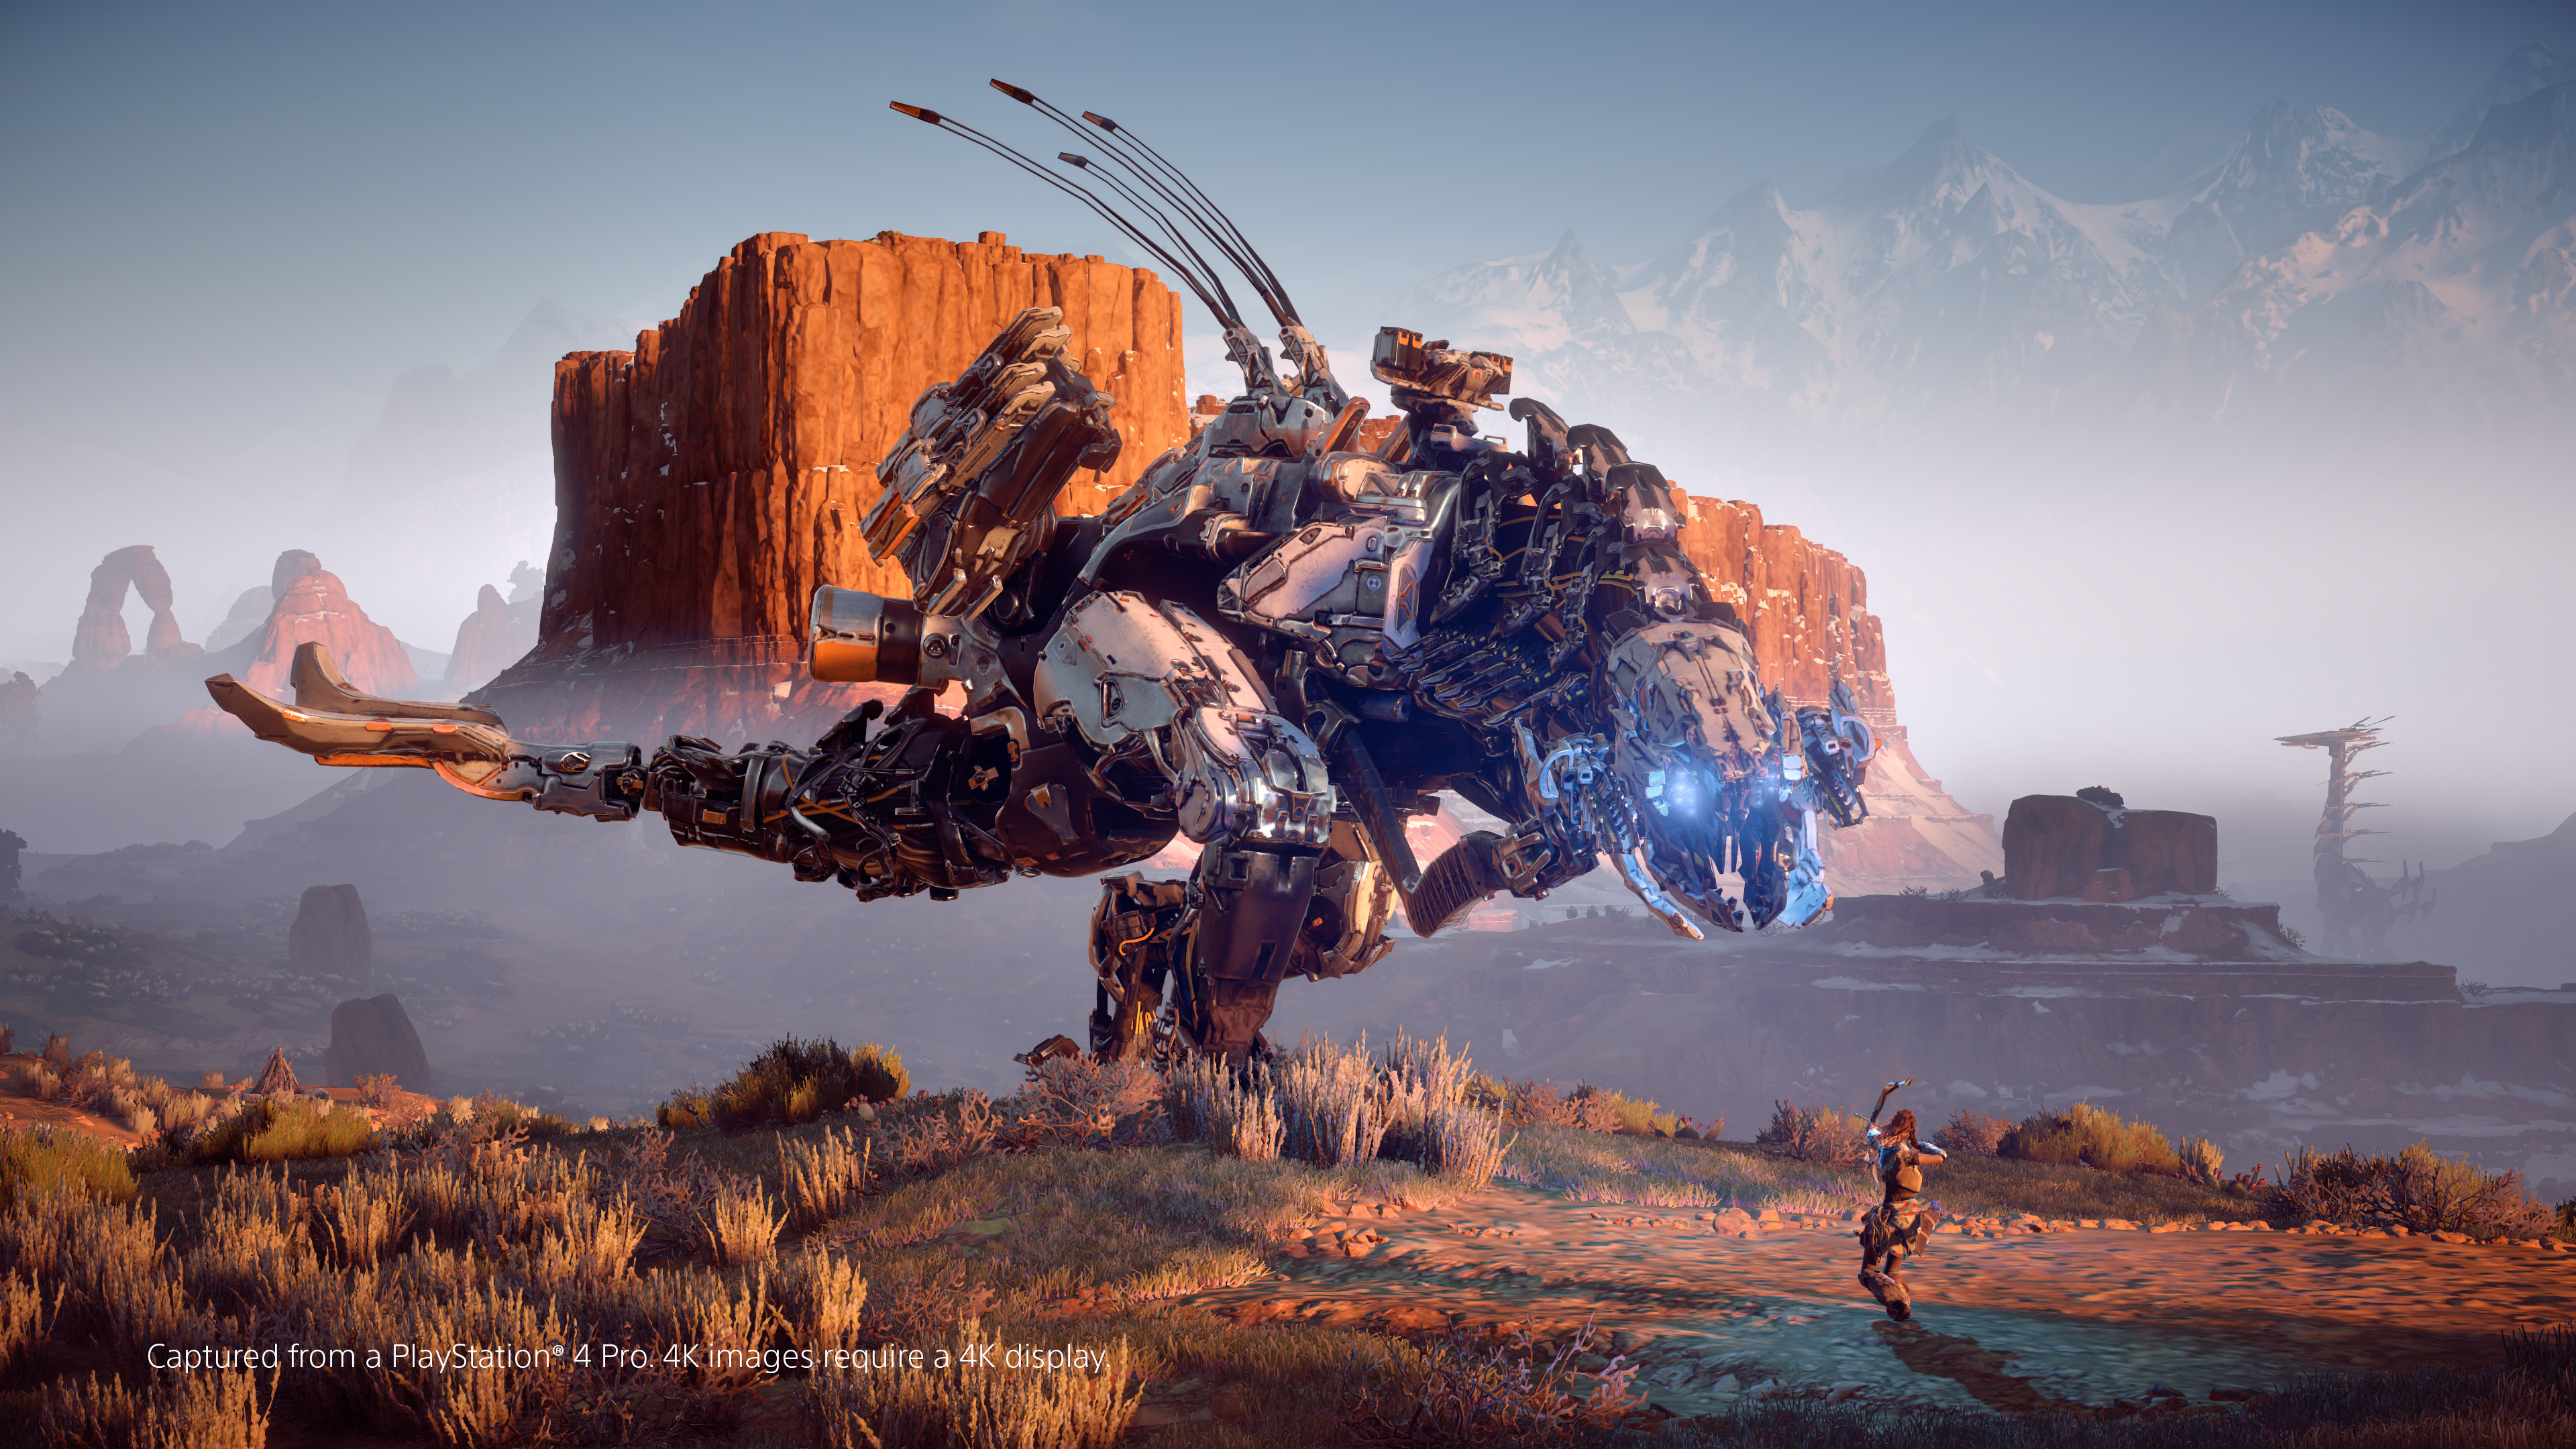 Media asset in full size related to 3dfxzone.it news item entitled as follows: Il game action RPG Horizon Zero Dawn in arrivo anche per la piattaforma PC | Image Name: news30530_Horizon-Zero-Dawn-Screenshots_4.jpg